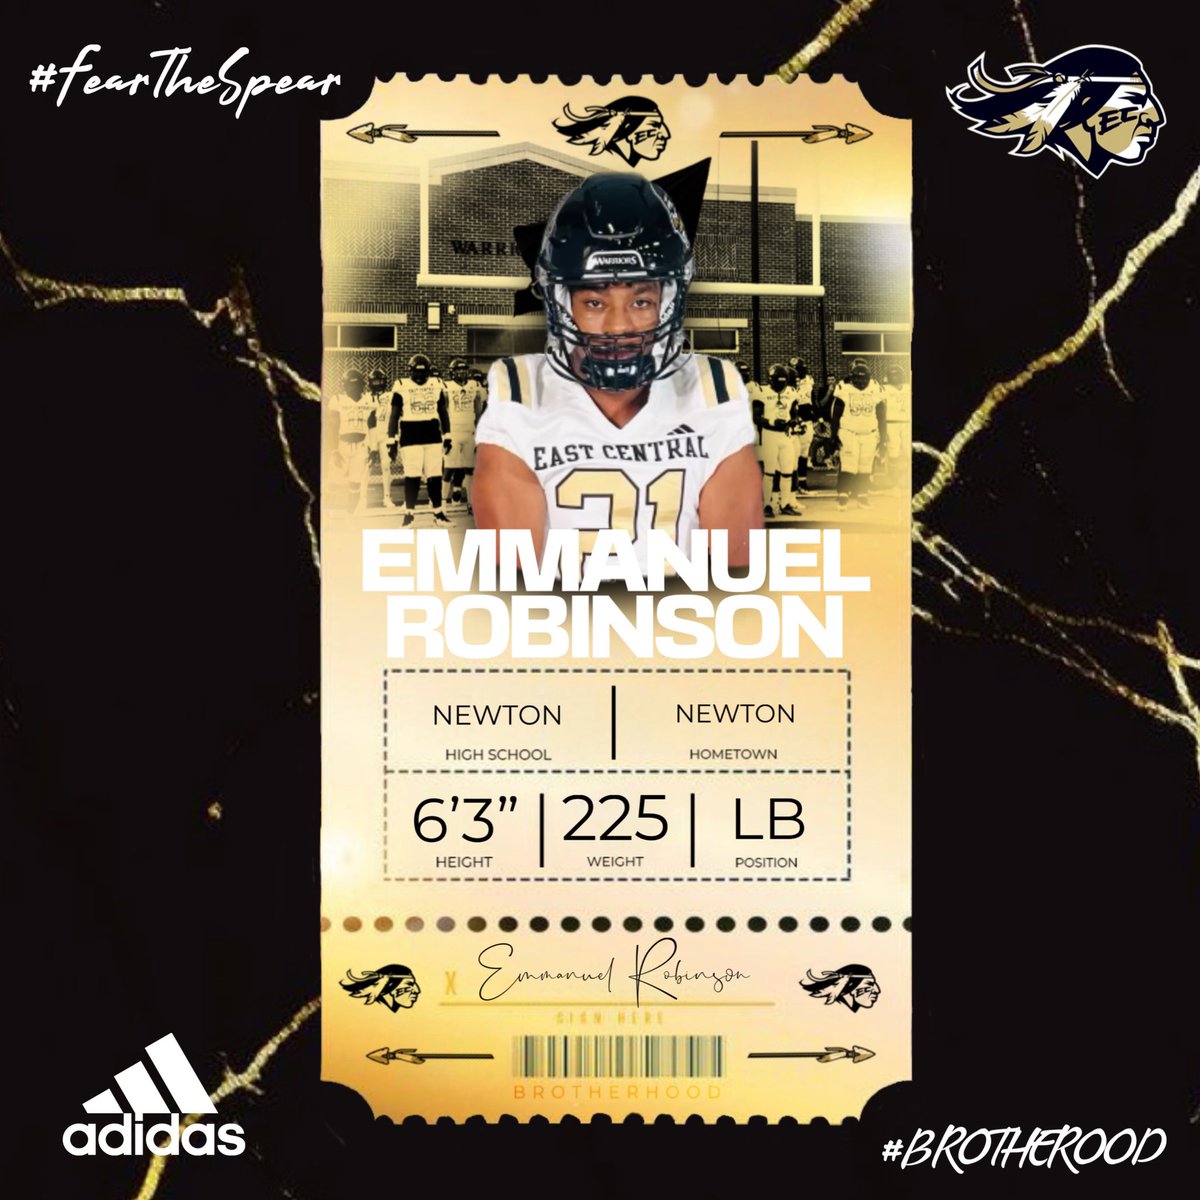 HARD HITTING LB from Newton!! @60_emmanuel has punched his ticket and joined the Brotherhood!! #BROTHERHOOD X #FearTheSpear